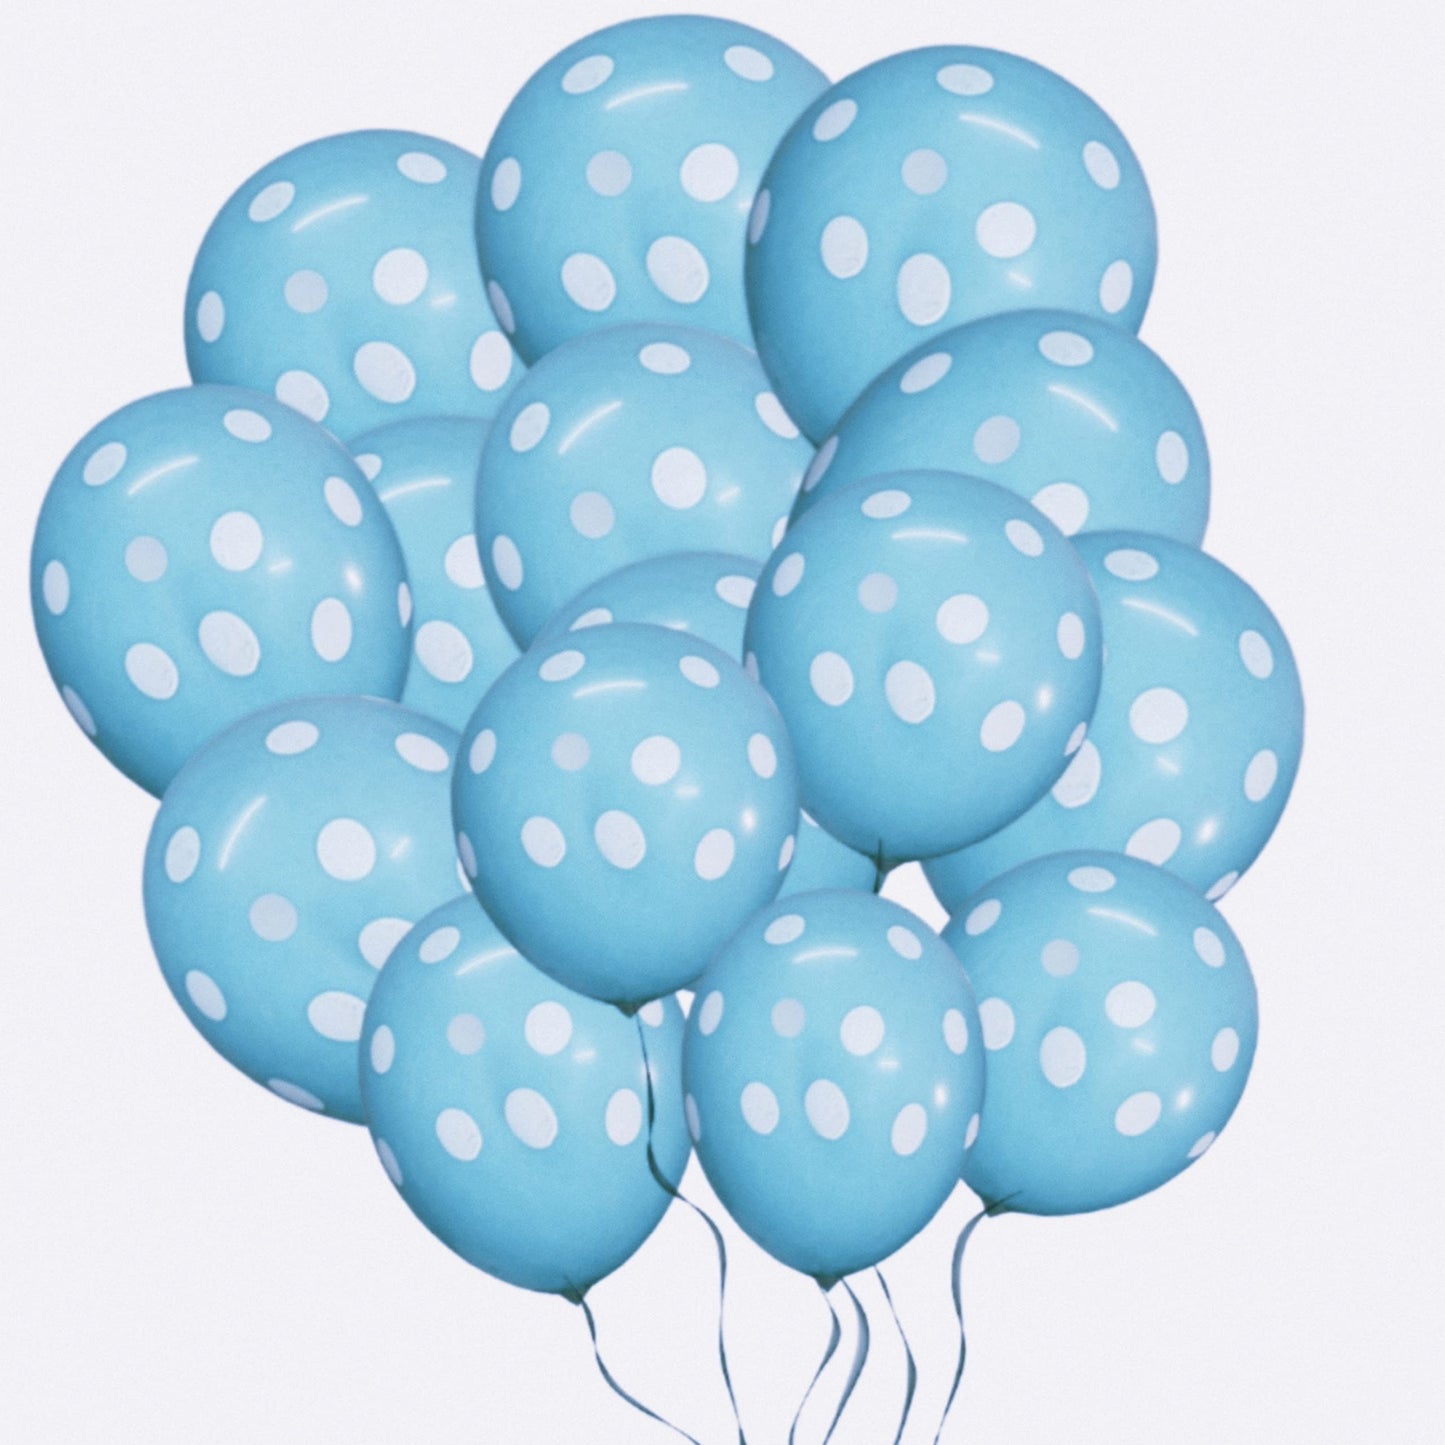 Blue Polka Dot 12 inches Balloon Pack of 10 for birthday decoration, Anniversary Weddings Engagement, Baby Shower, New Year decoration, Theme Party balloons